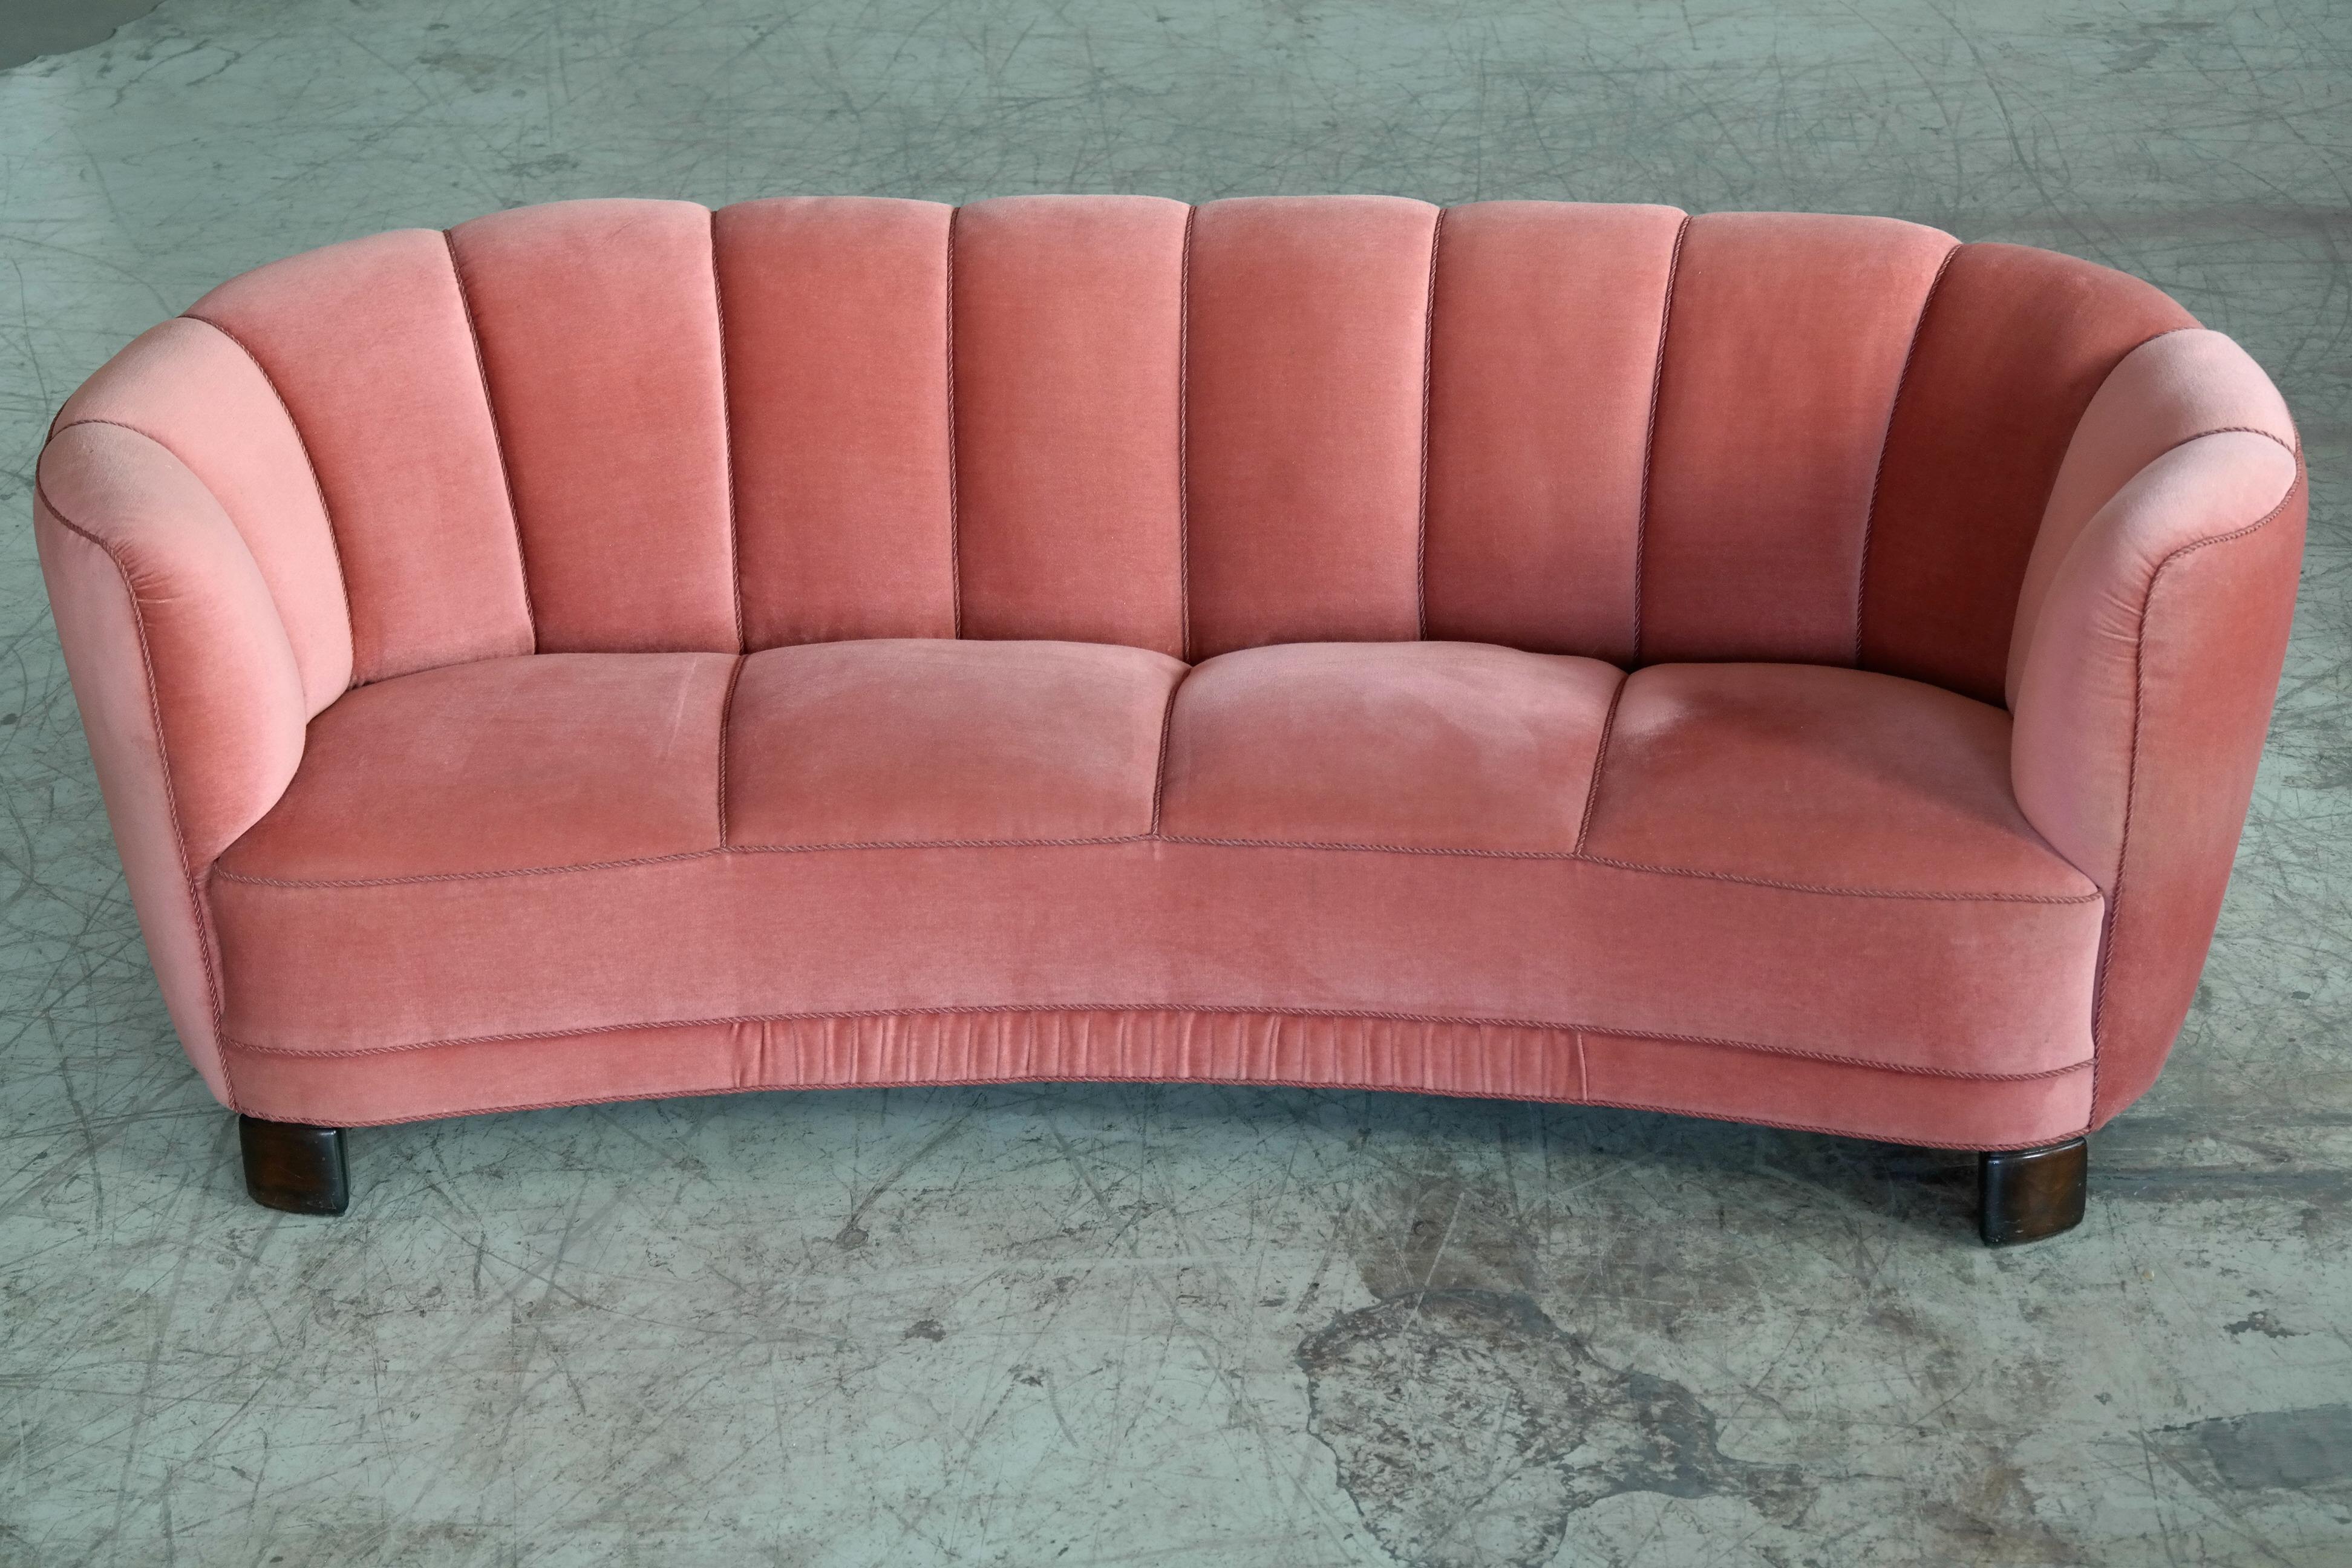 Beautiful and very elegant 1940s large size curved three-seat sofa in pink mohair fabric. The sofa has springs in the seat and the backrest and the cushions are nice and firm and the sofa solid and sturdy. The mohair wool fabric is in good condition